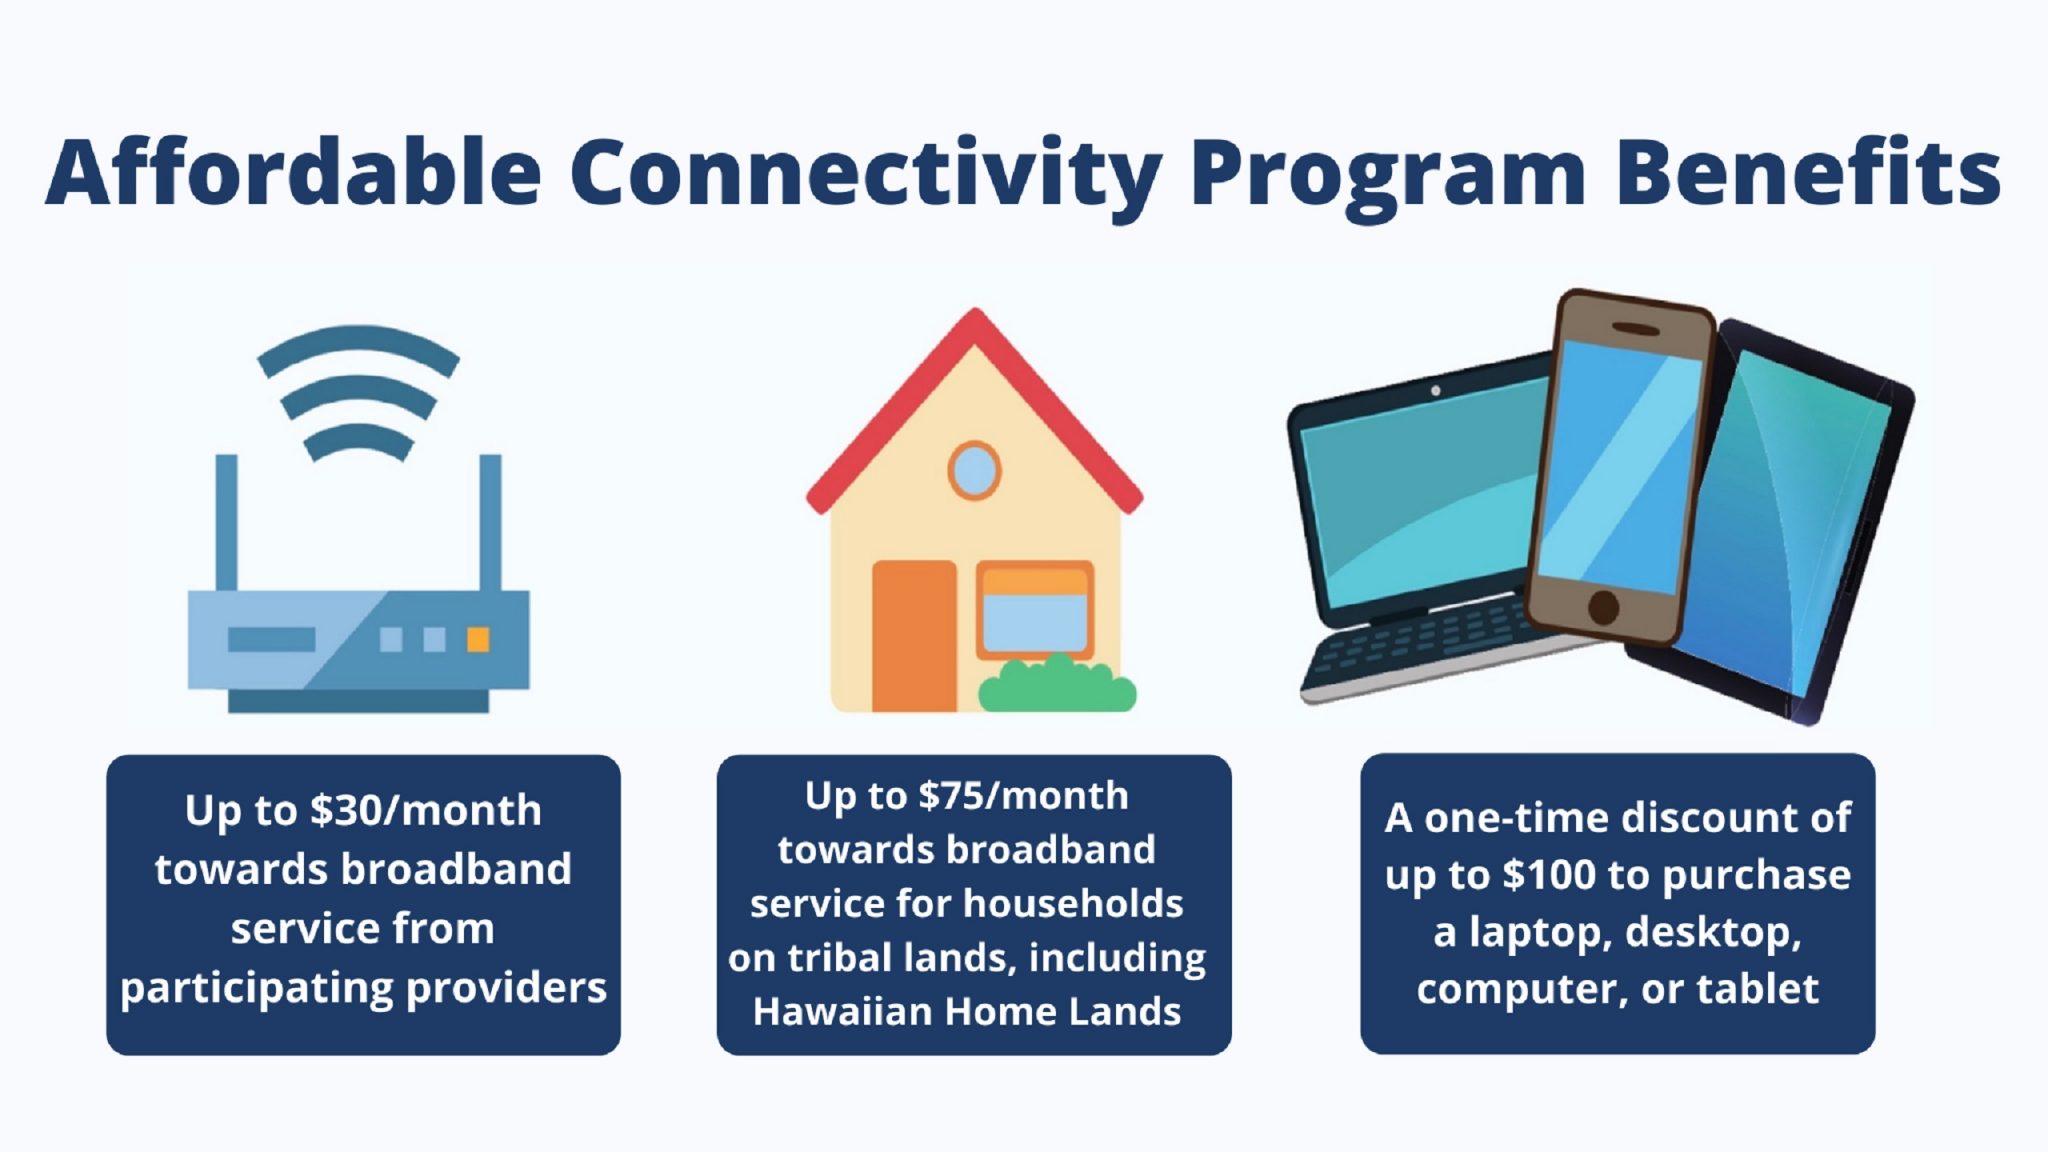 Cut Your Bill with the Affordable Connectivity Program